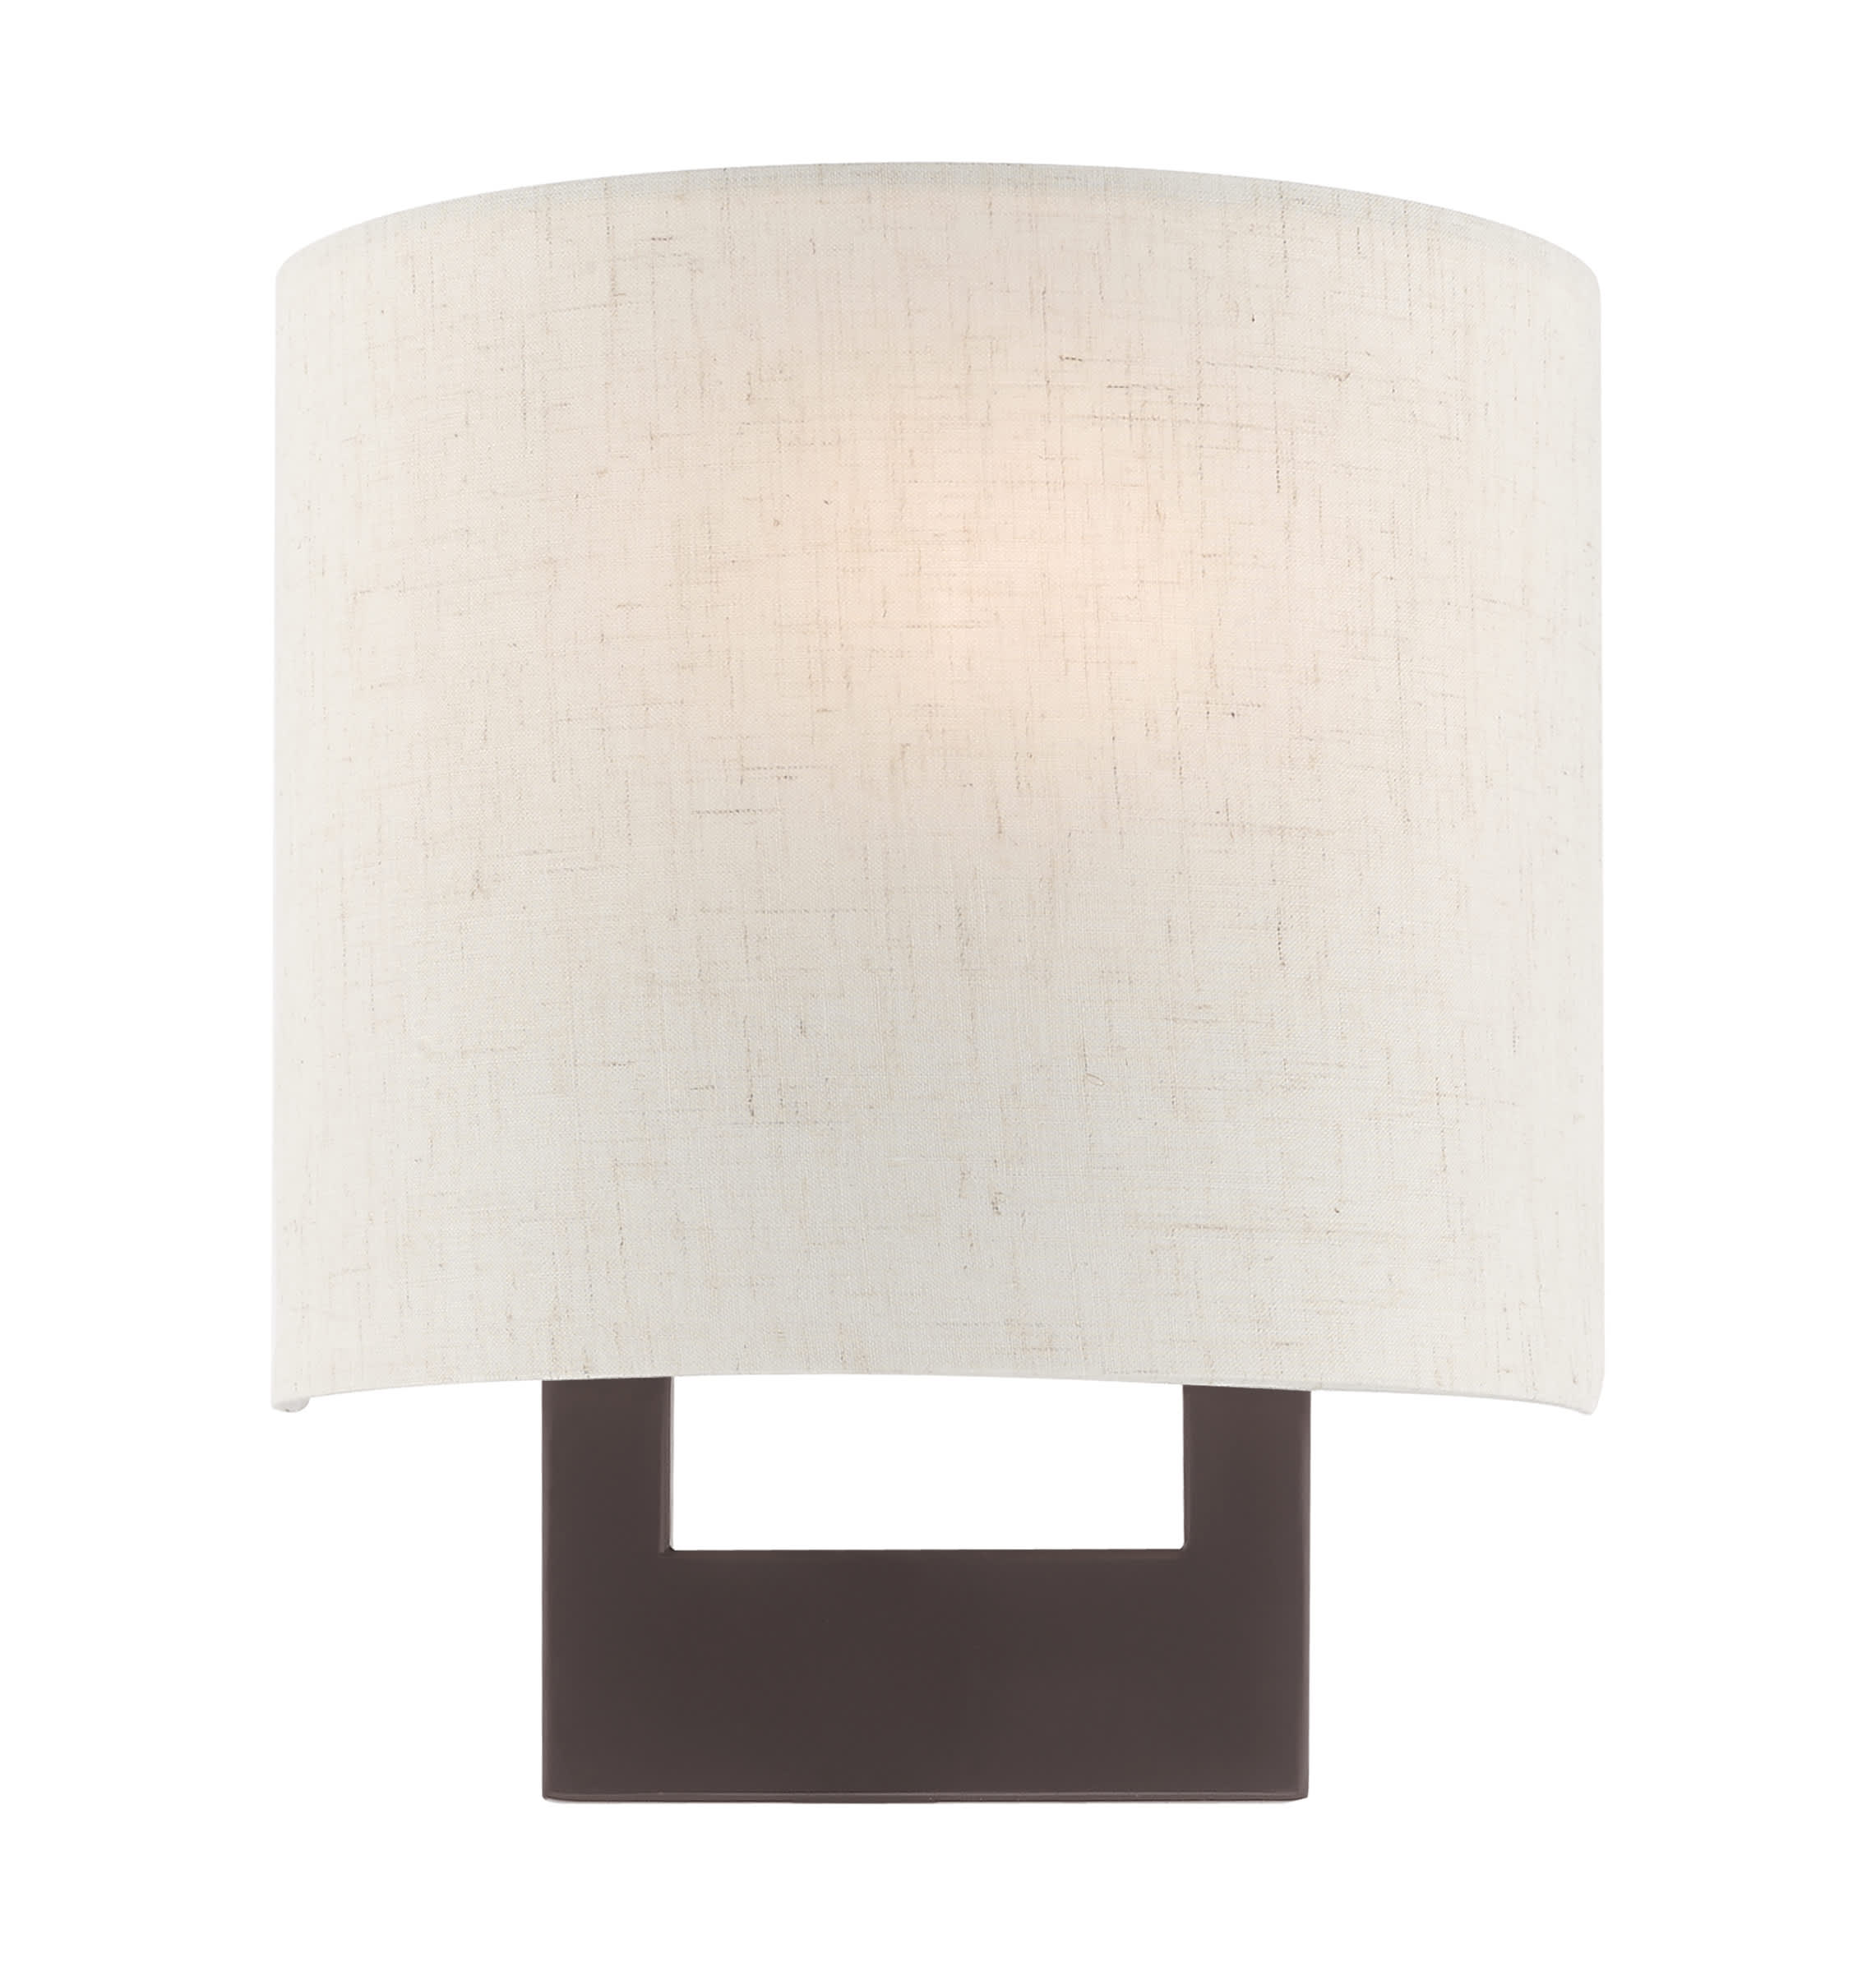 Nckl Finish Livex Lighting 52132-91 Transitional Two Light Wall Sconce from Meridian Collection in Pwt B/S Slvr Brushed Nickel 